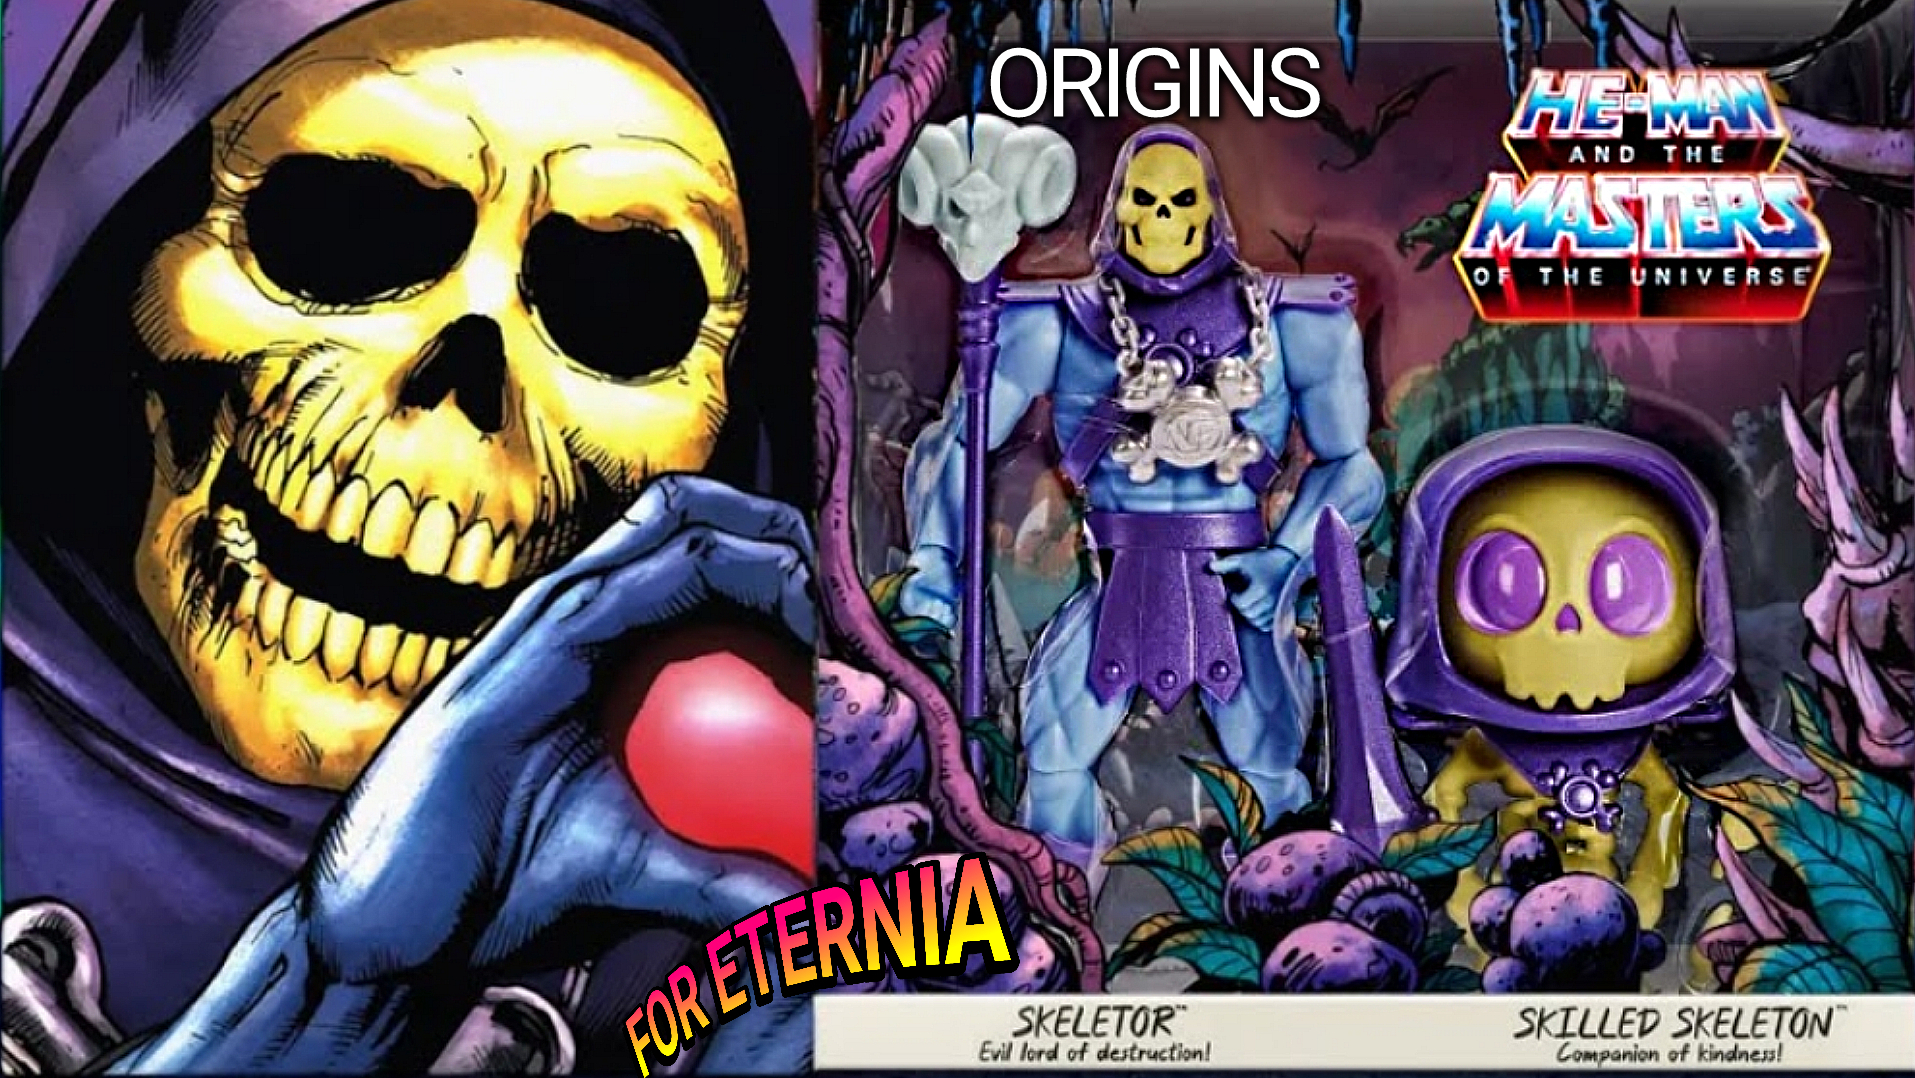 Origins Filmation Skeletor and Skilled Skeleton Figure 2-Pack will be available for Pre-order October 6th